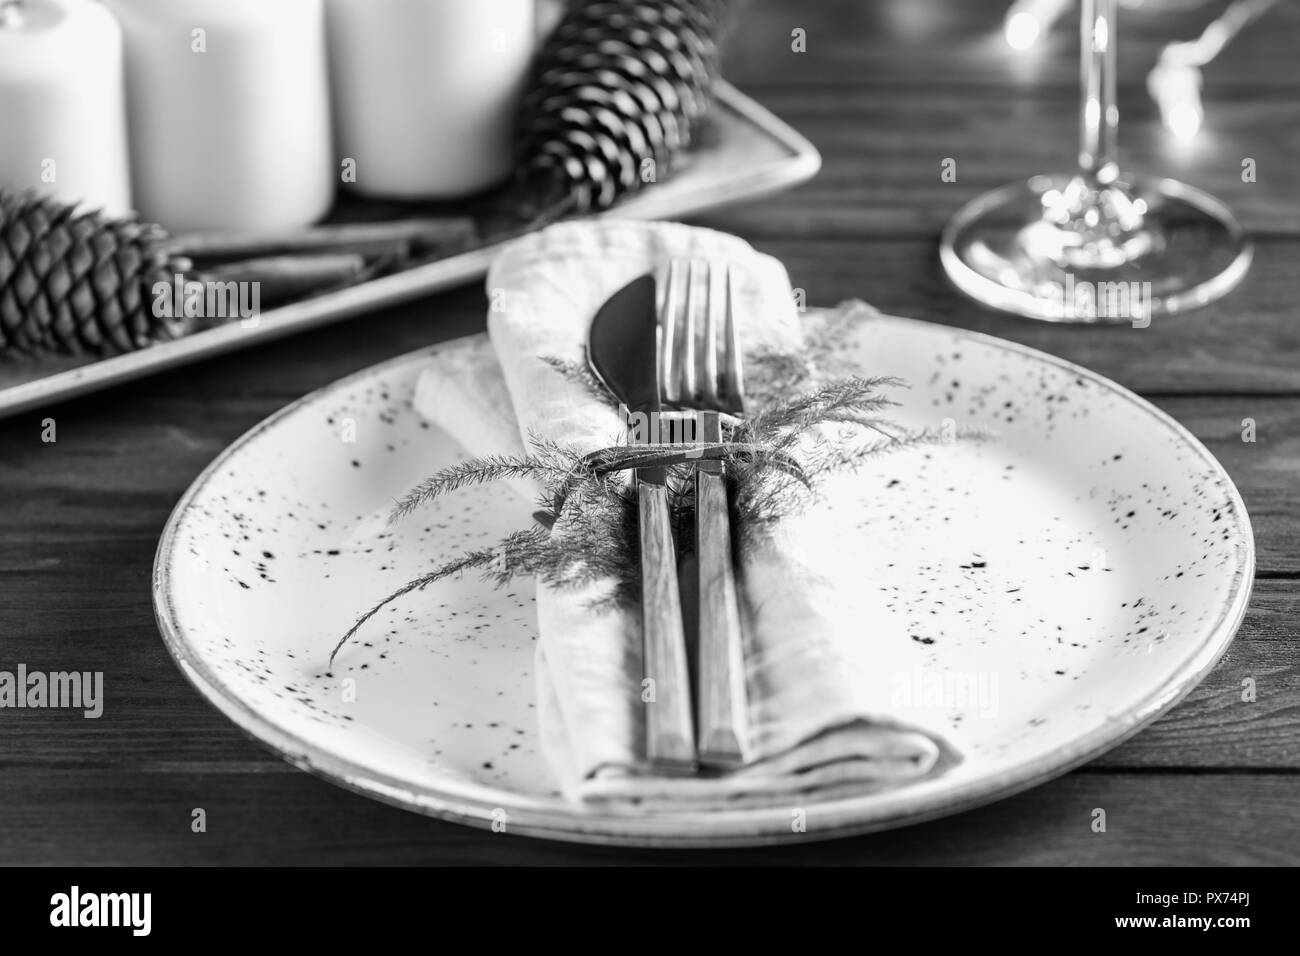 Decorated table setting among white candles and winter decor. The concept of a festive dinner. Black and white photography. Stock Photo